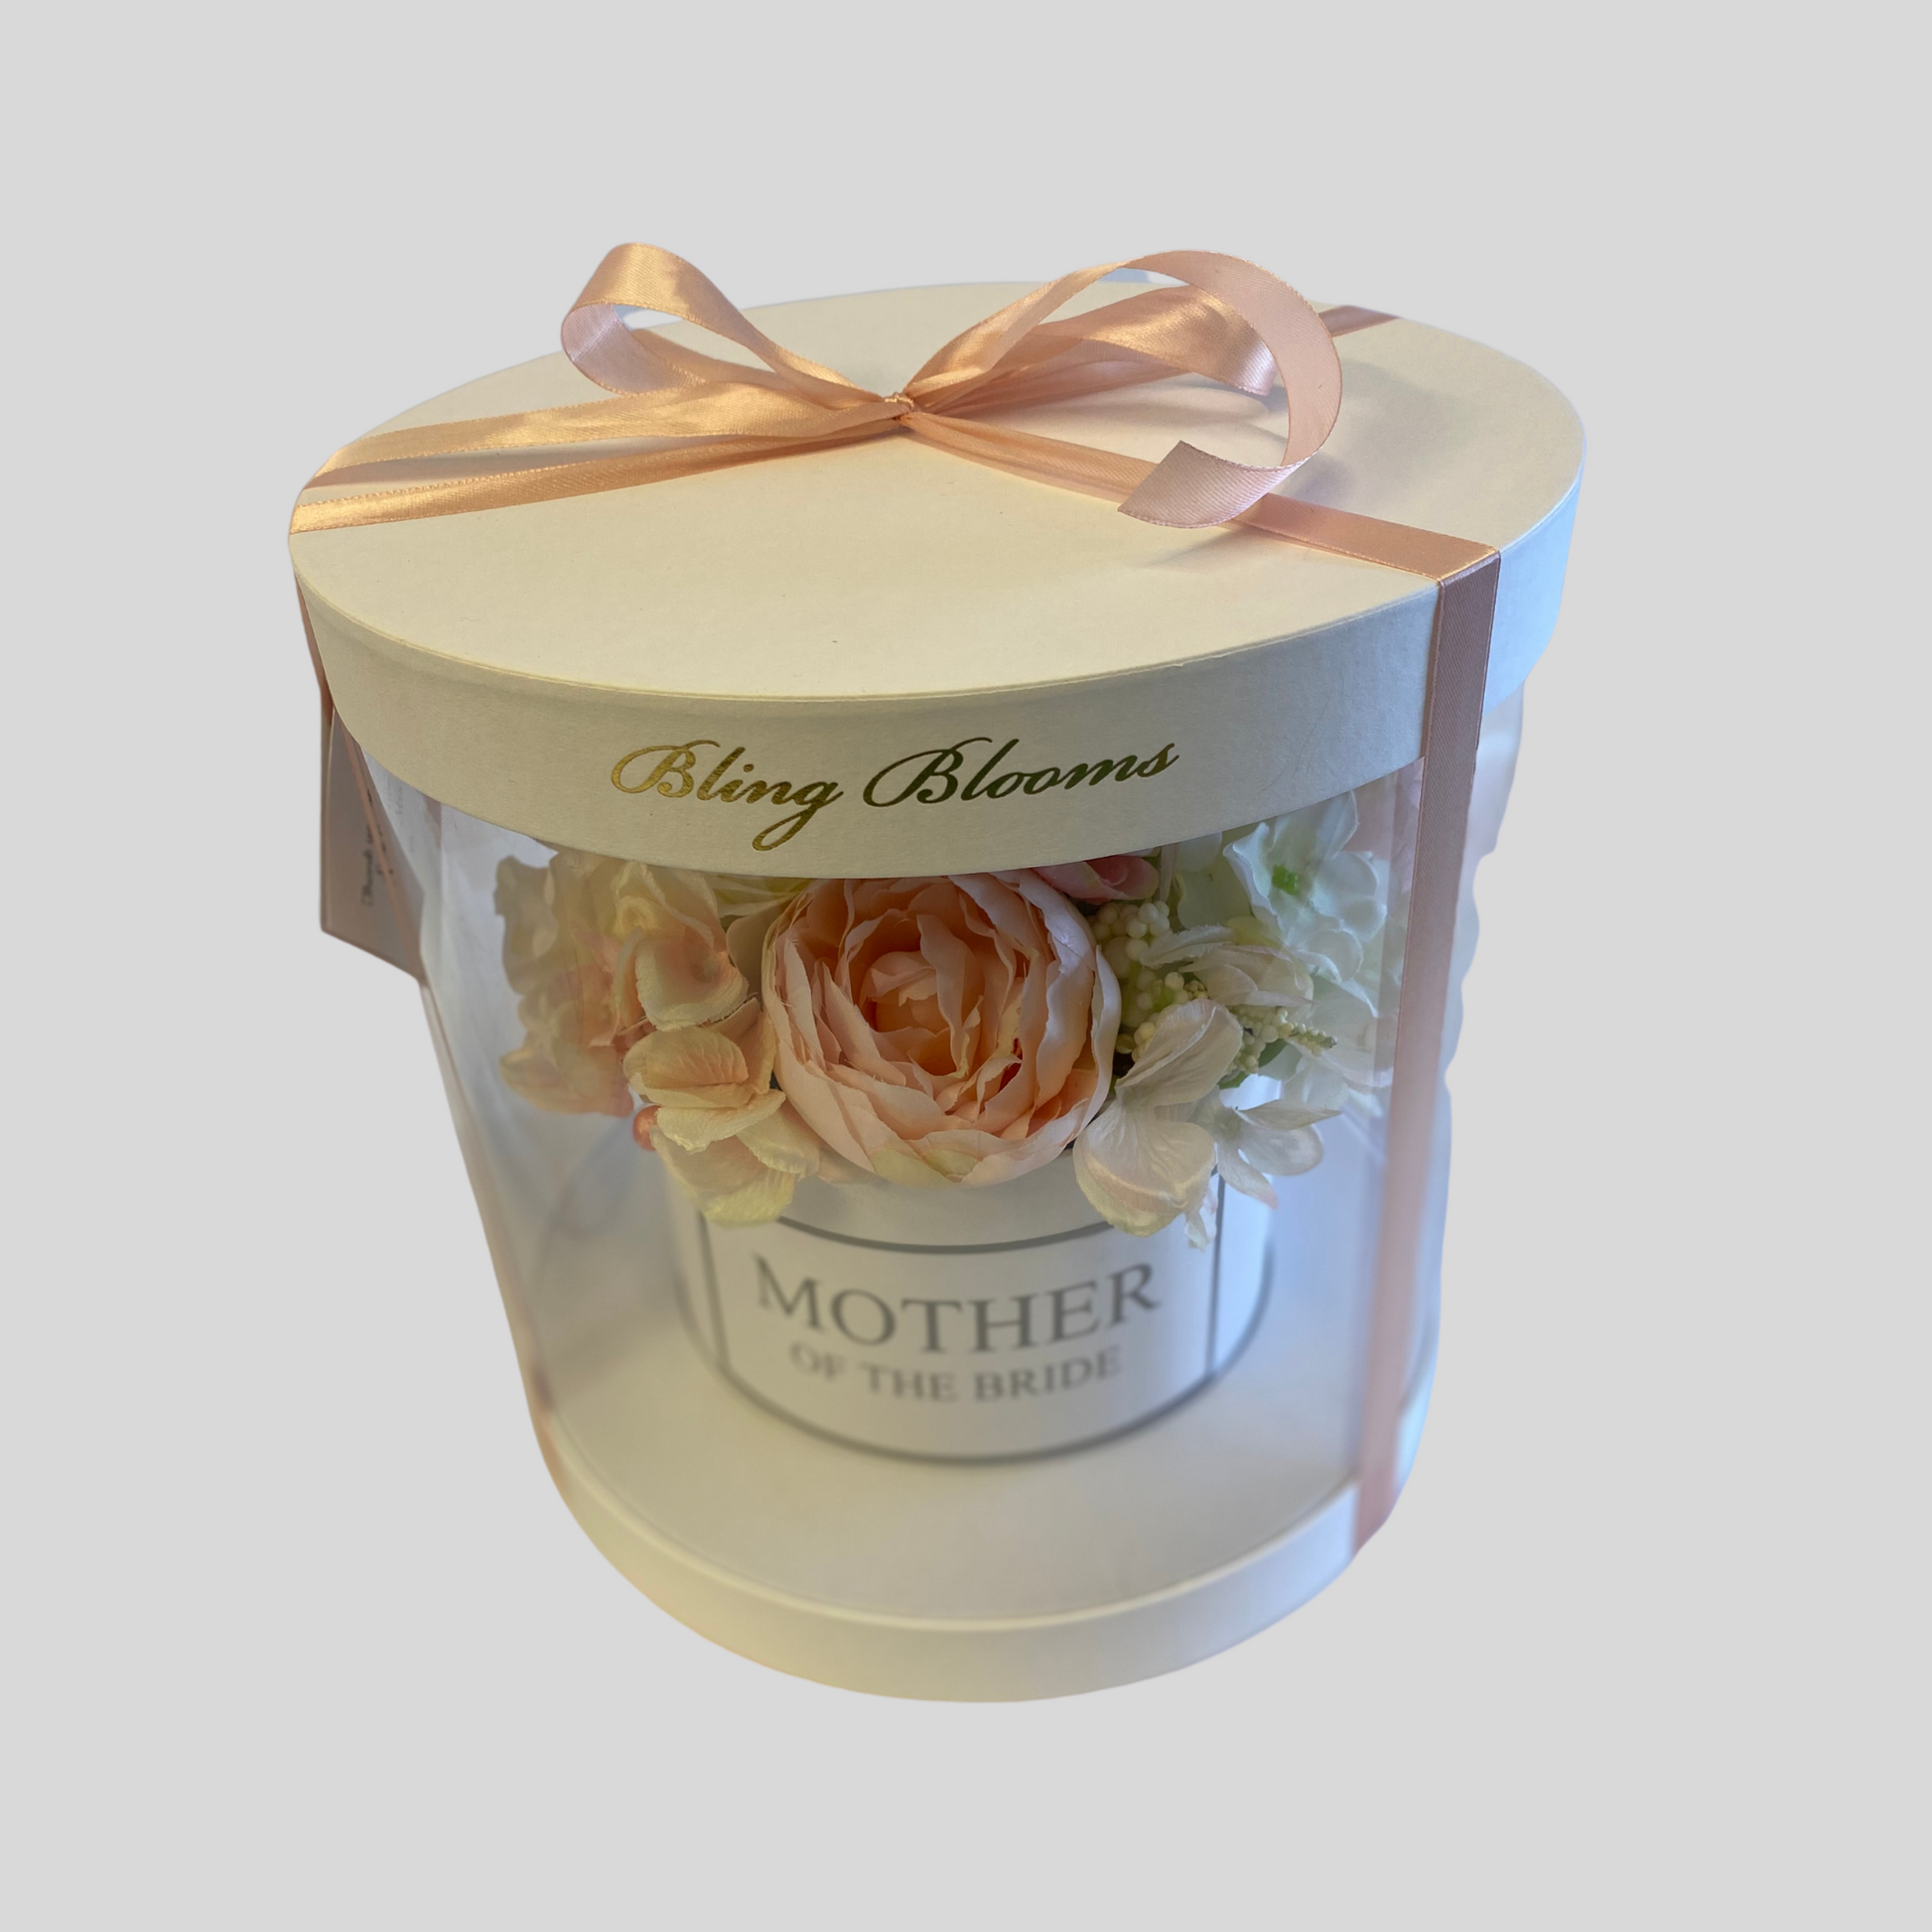 Artificial Silk Blooms Gift Box - Ivory and Blush silk flowers - personalised gift box - mother of the bride